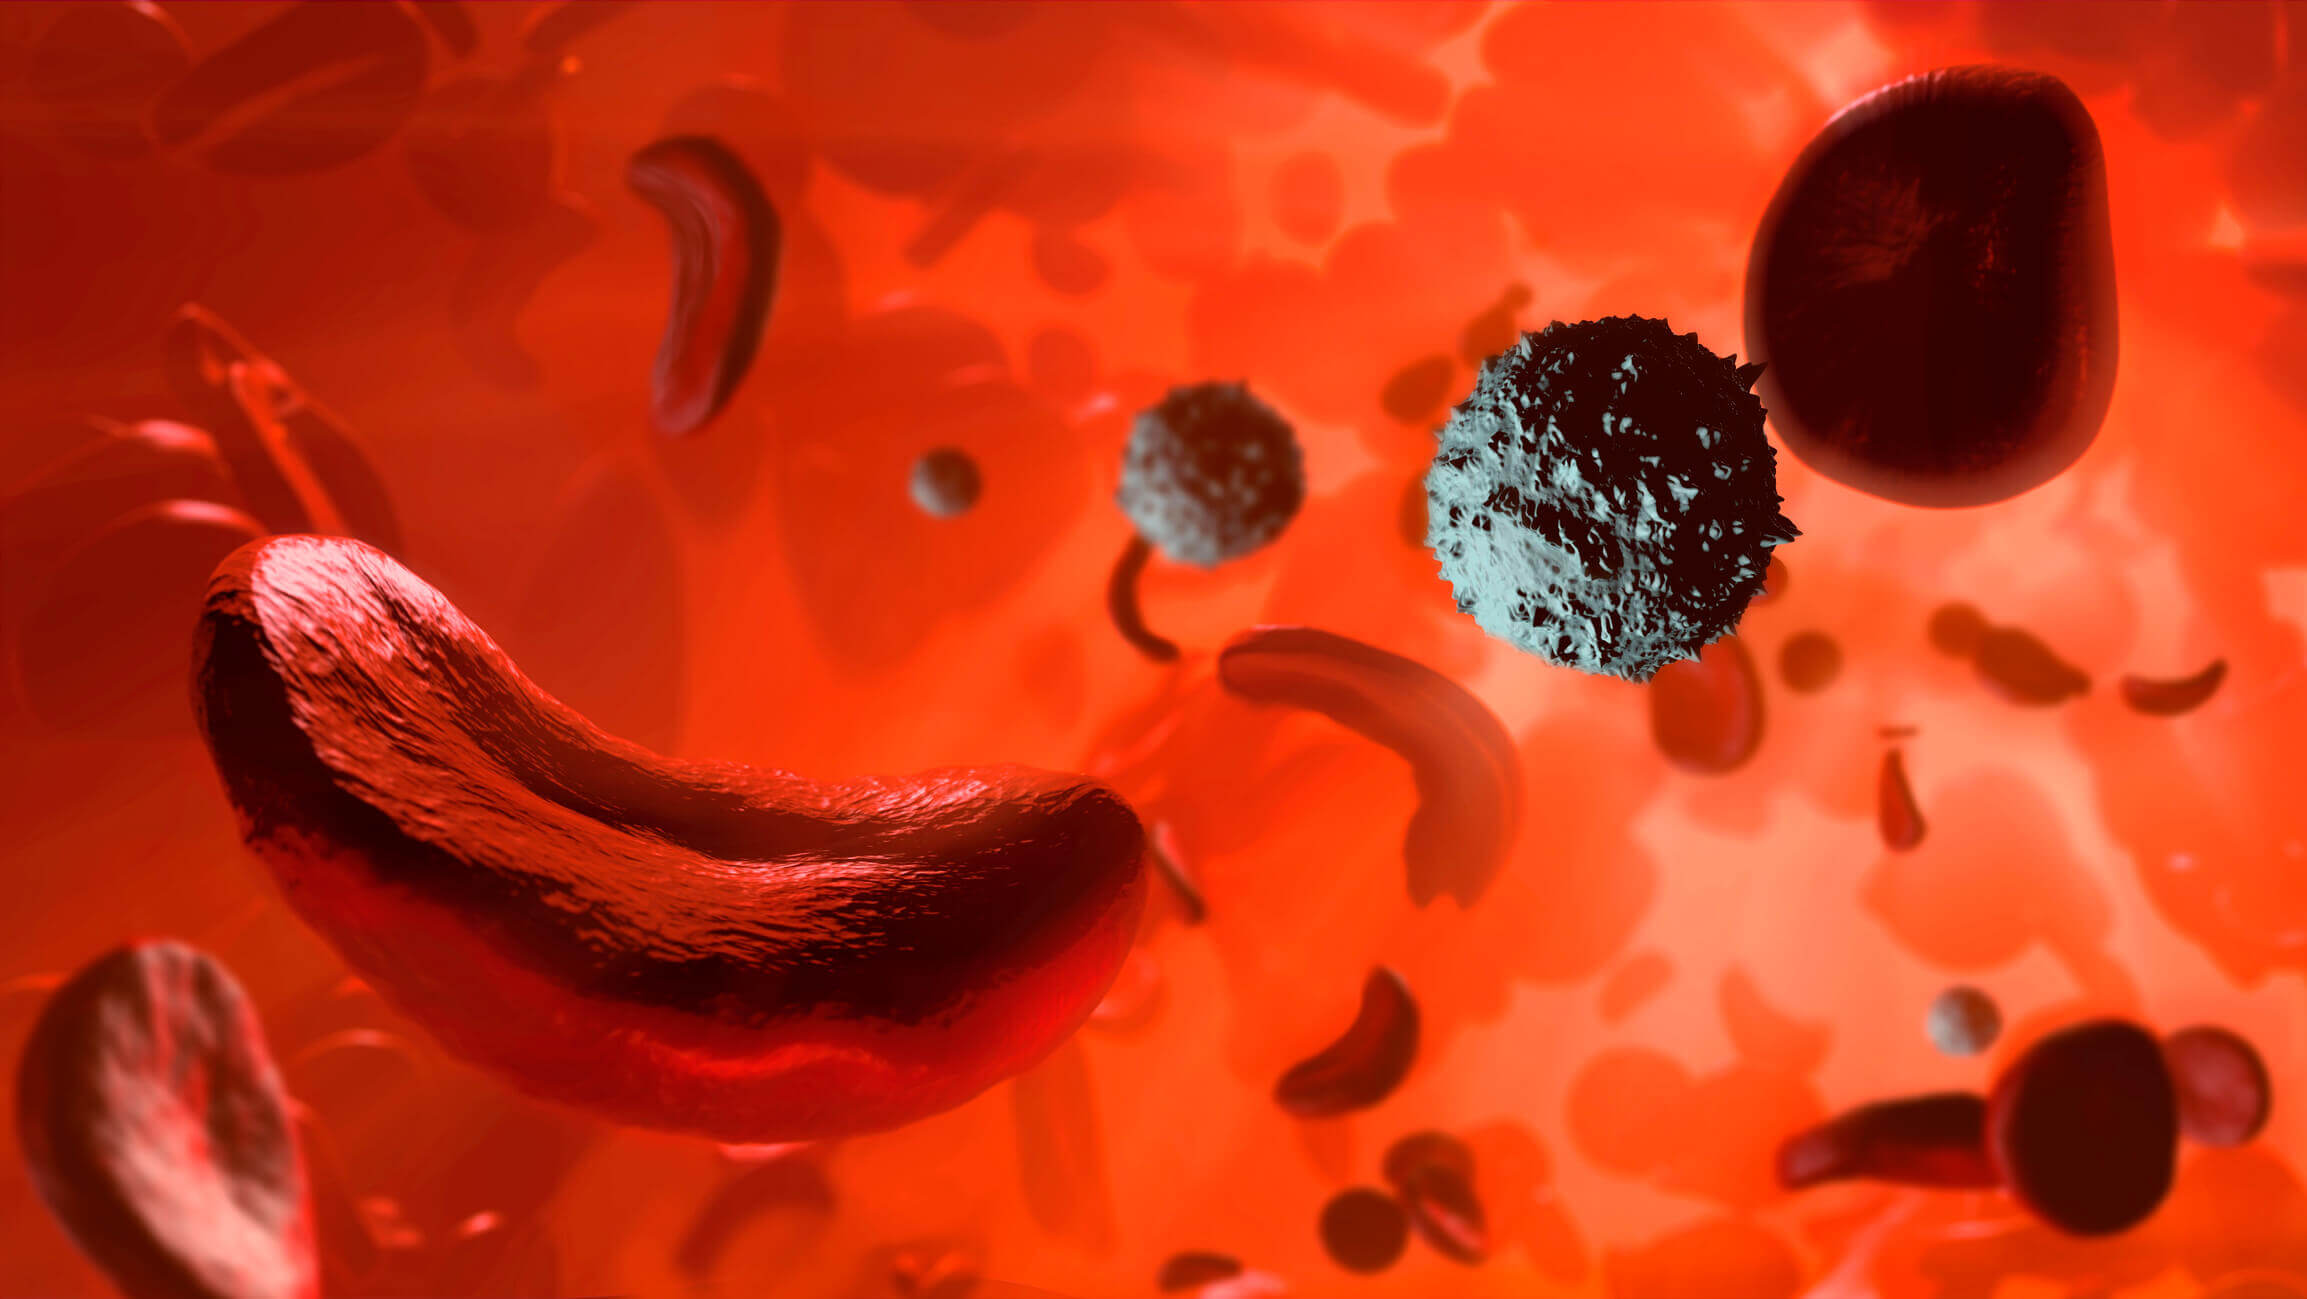 New Hope for a Once Neglected Disease: Advances in Sickle Cell Treatments